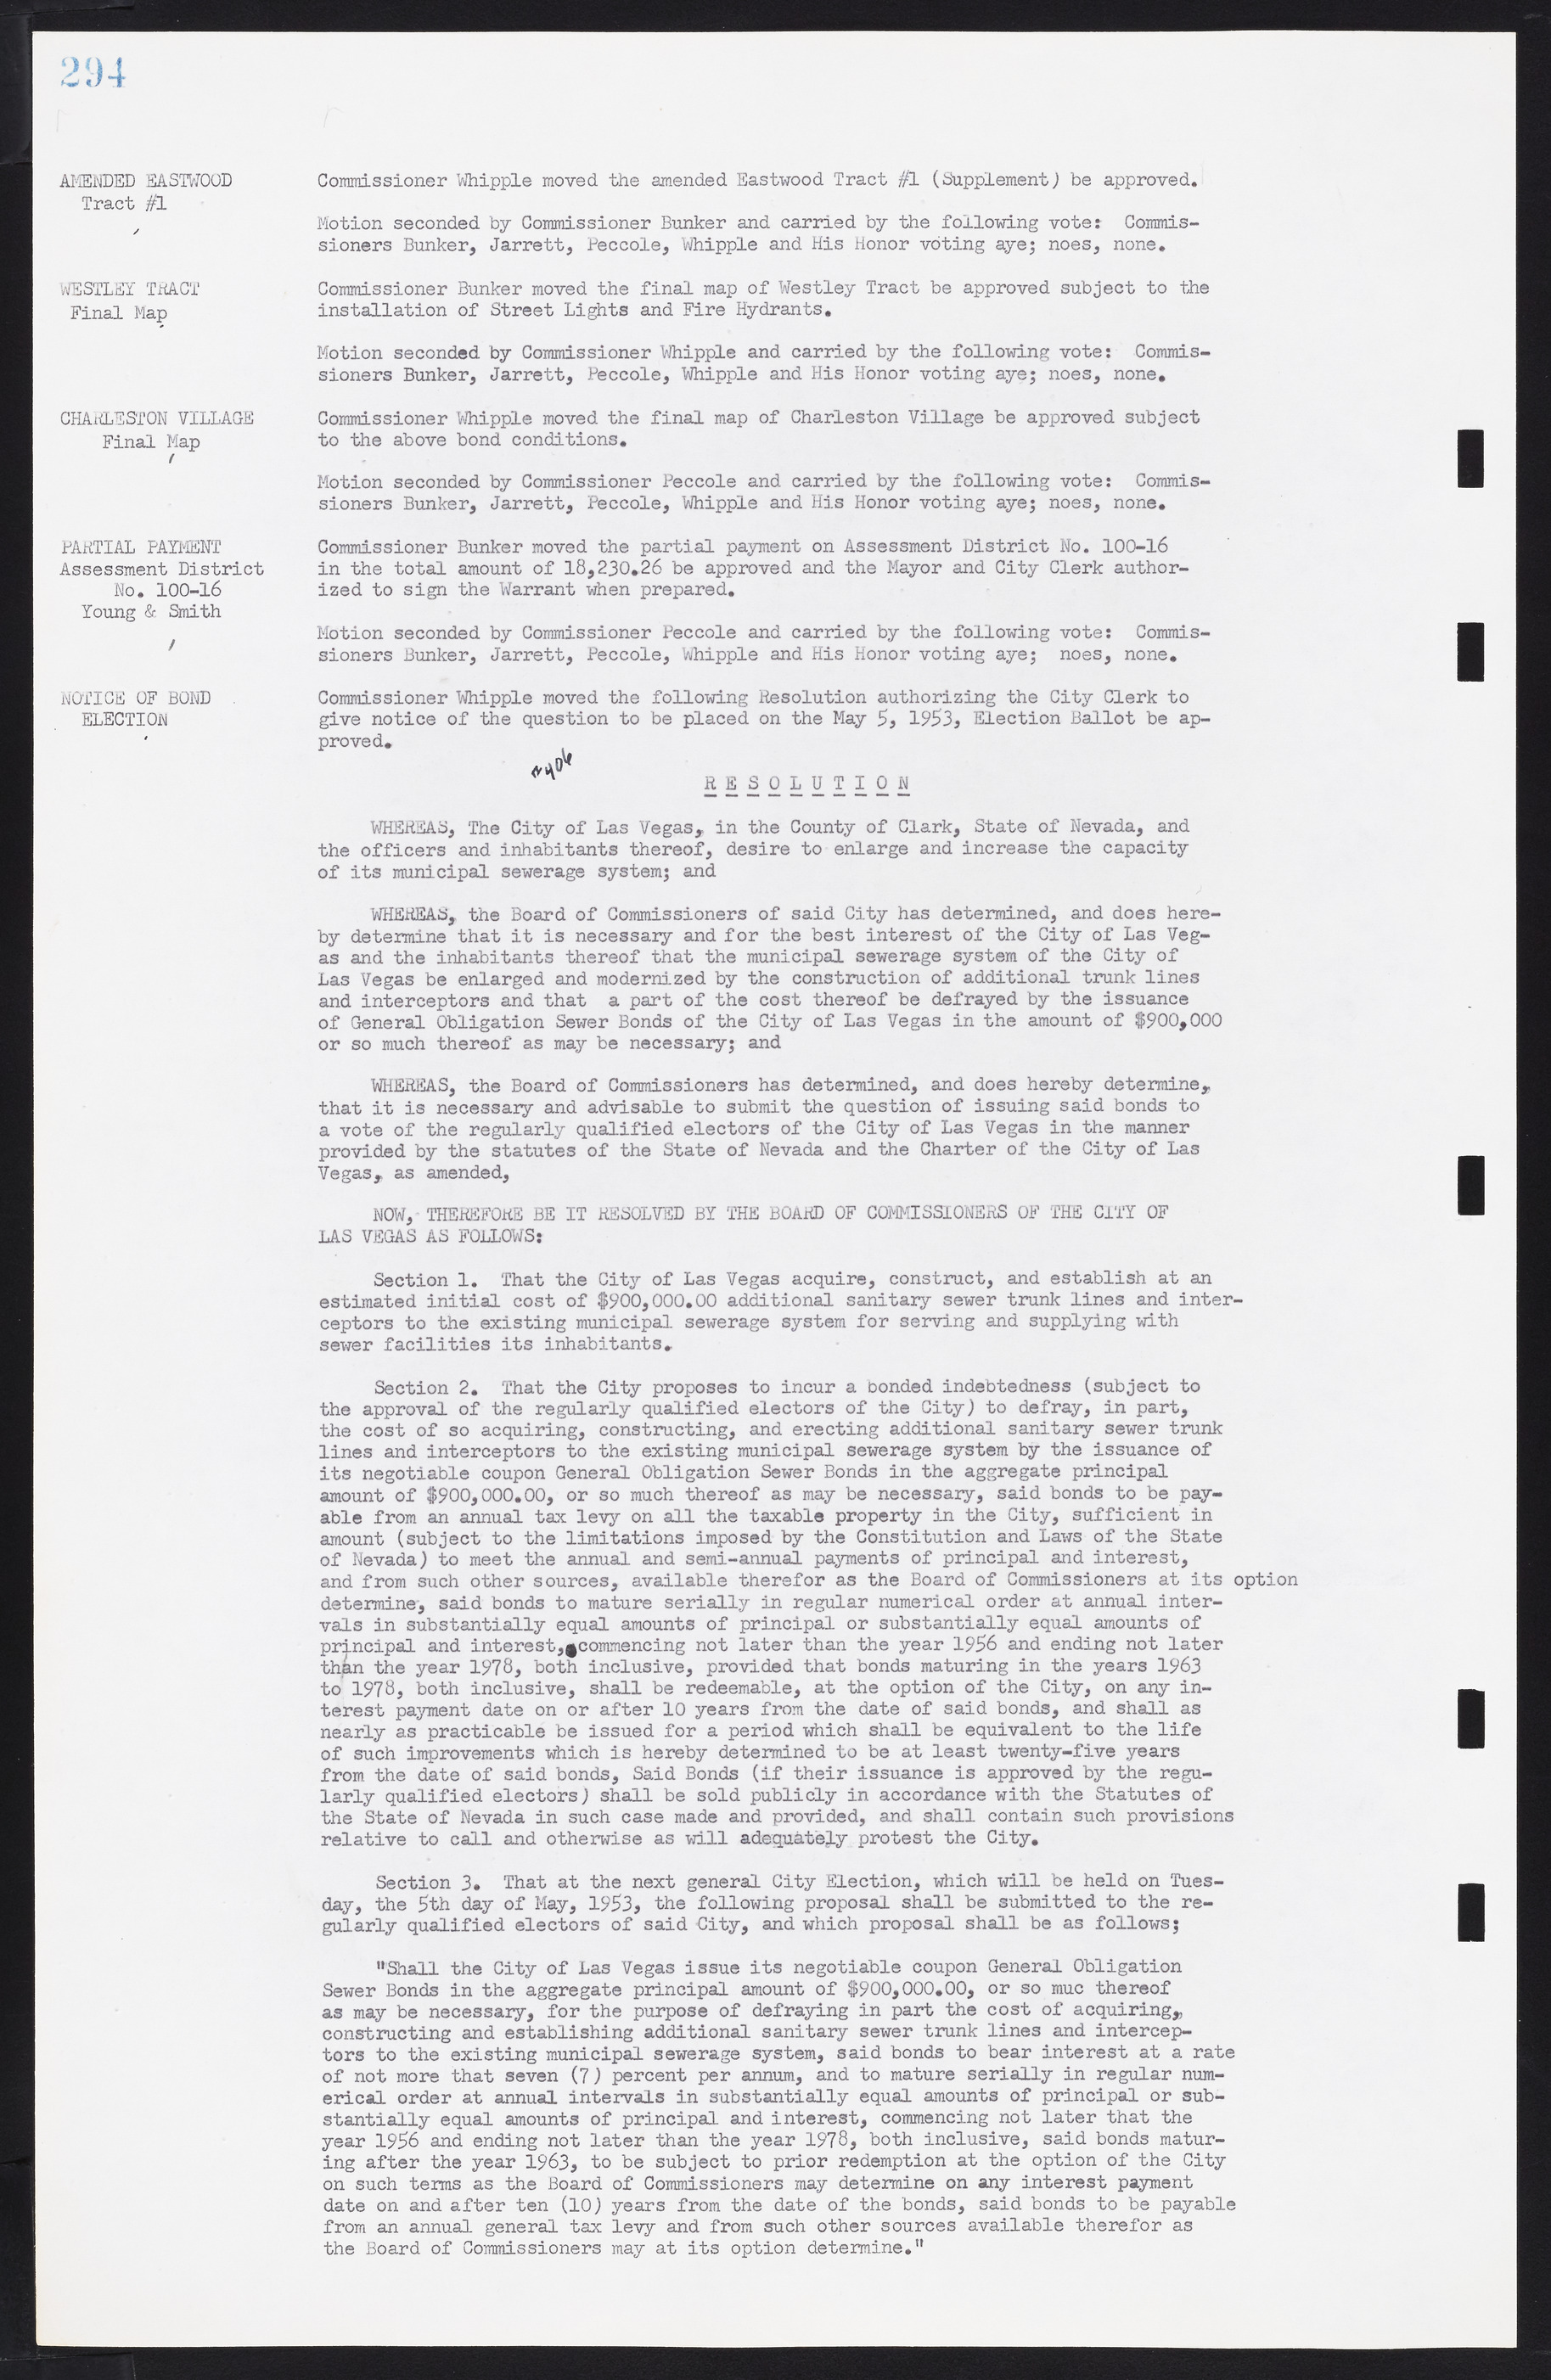 Las Vegas City Commission Minutes, May 26, 1952 to February 17, 1954, lvc000008-322